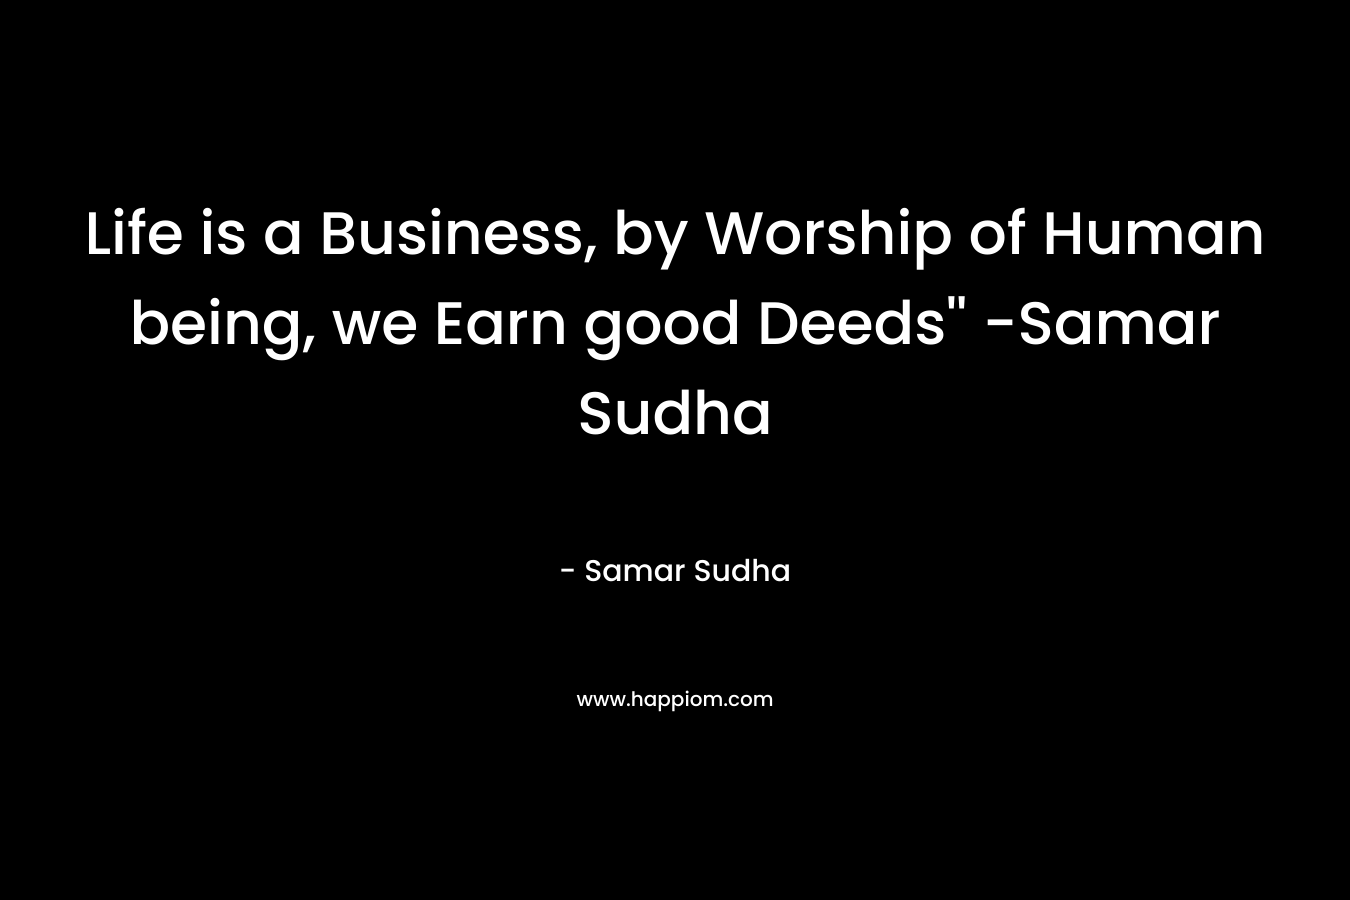 Life is a Business, by Worship of Human being, we Earn good Deeds'' -Samar Sudha